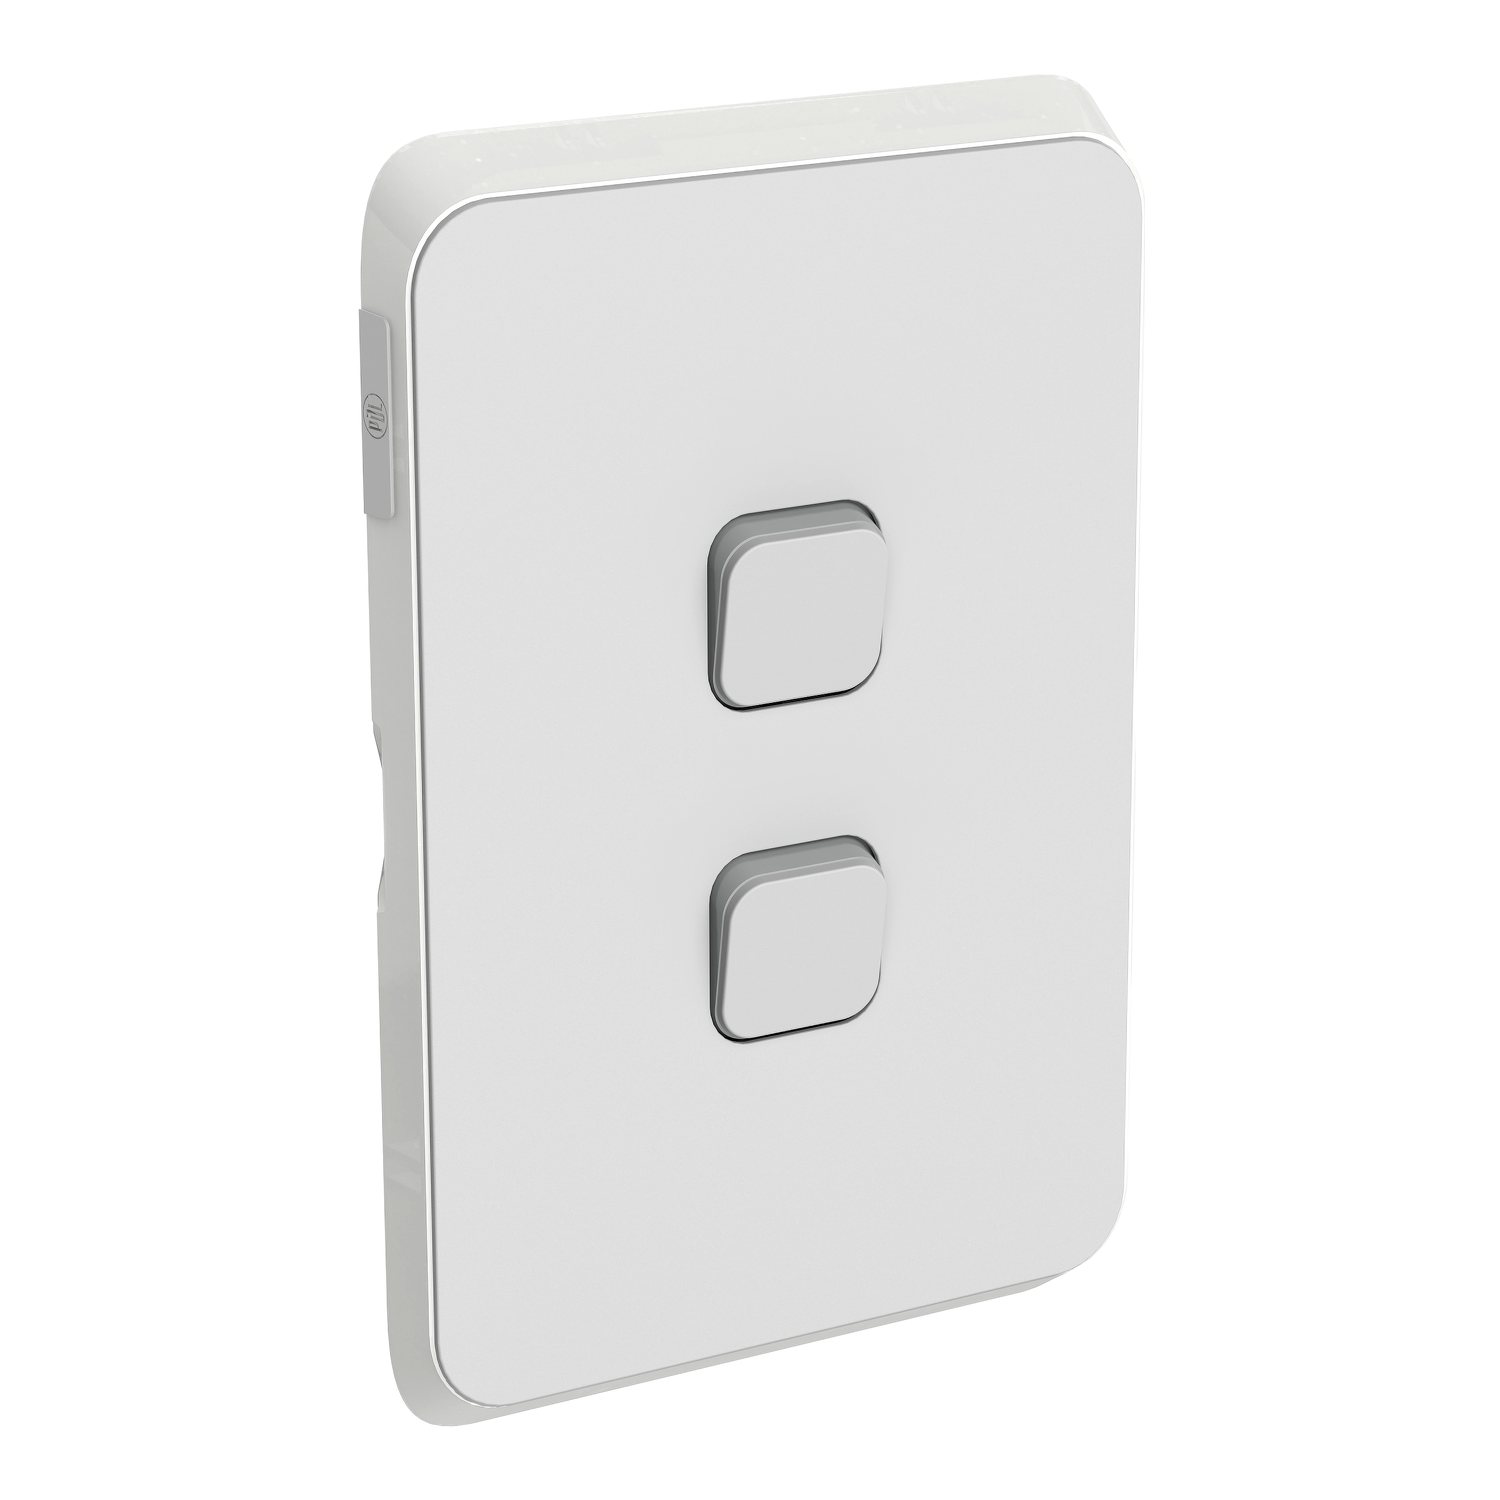 PDL Iconic - Cover Plate Switch 2-Gang - Cool Grey